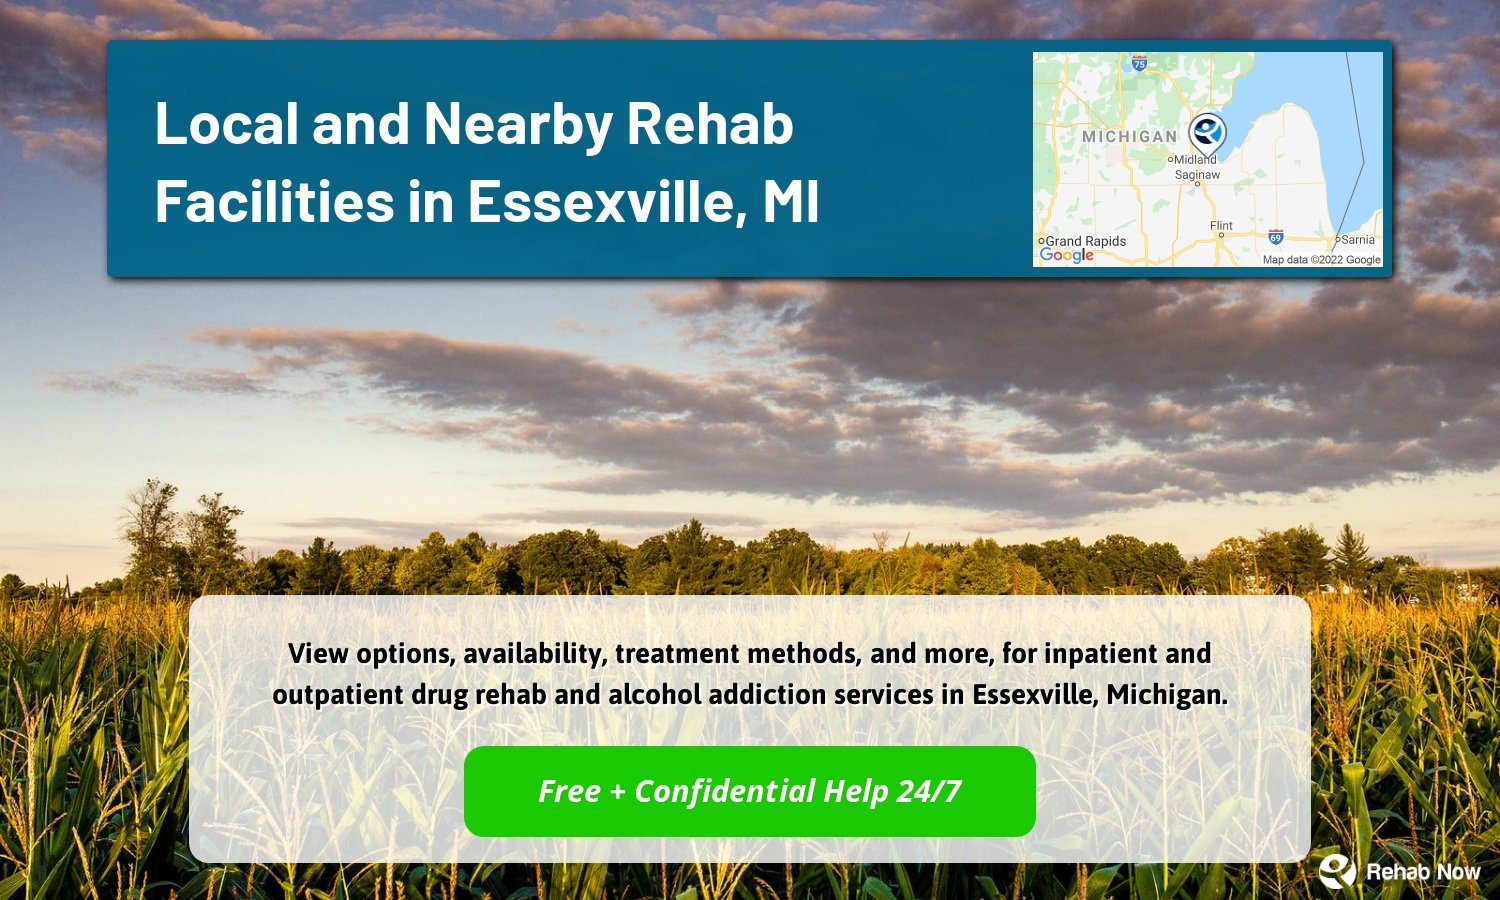 View options, availability, treatment methods, and more, for inpatient and outpatient drug rehab and alcohol addiction services in Essexville, Michigan.